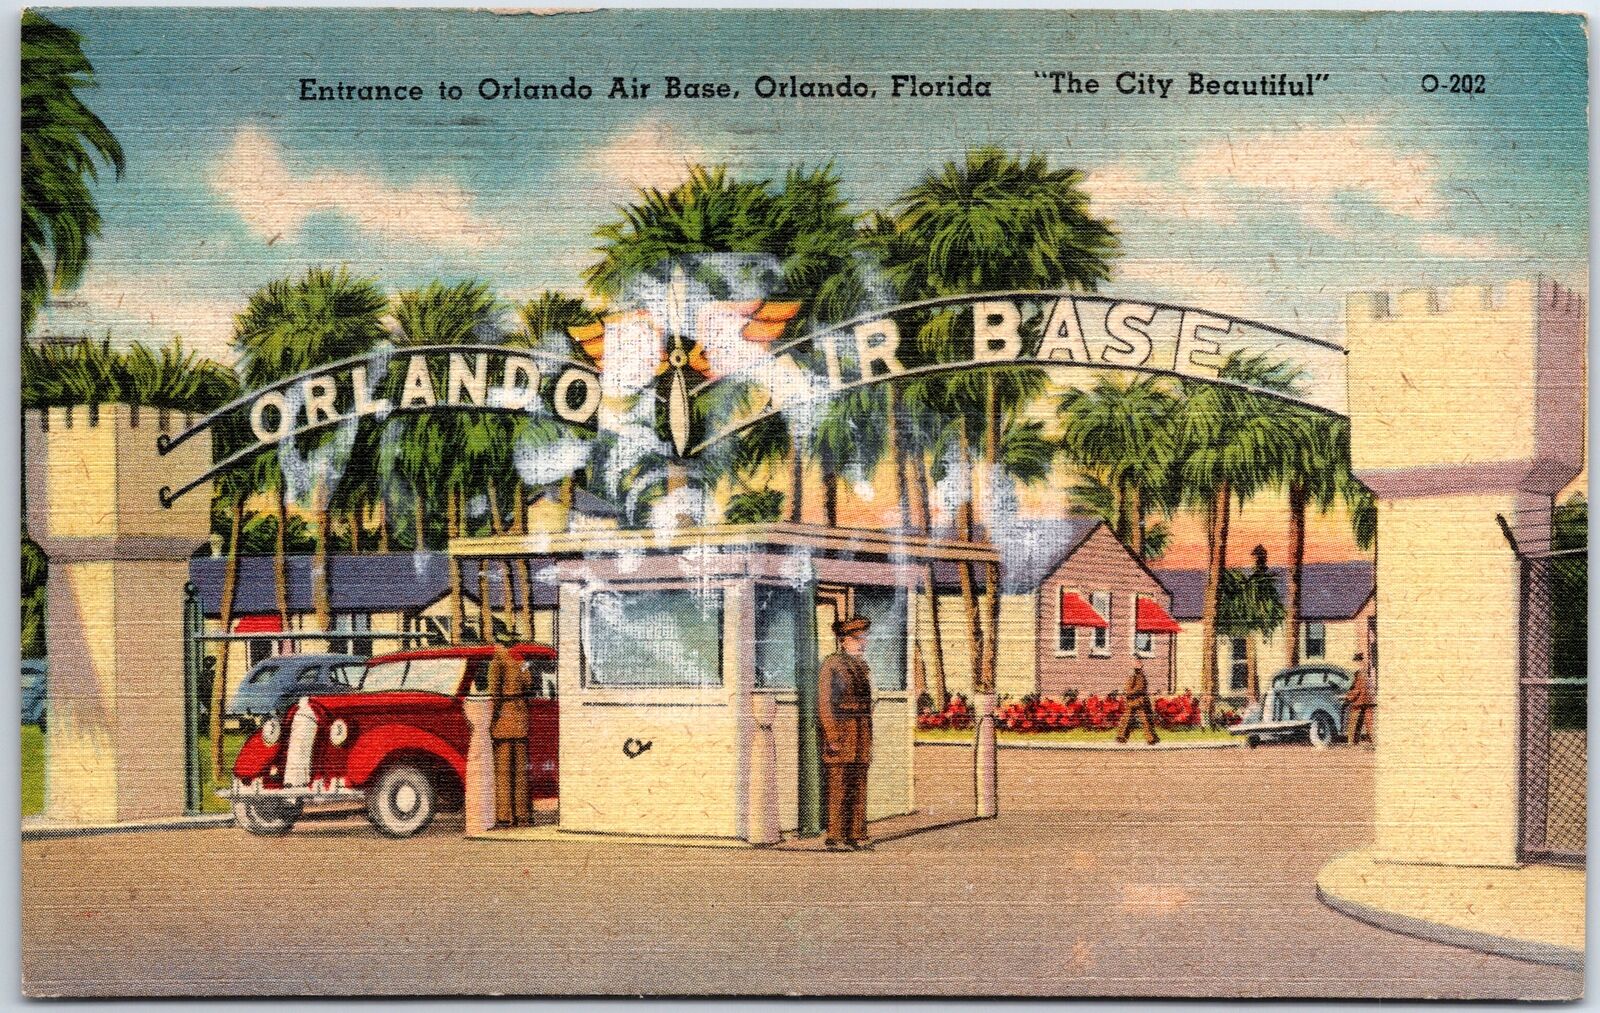 VINTAGE POSTCARD ENTRANCE TO THE ORLANDO AIR BASE IN FLORIDA POSTED 1946